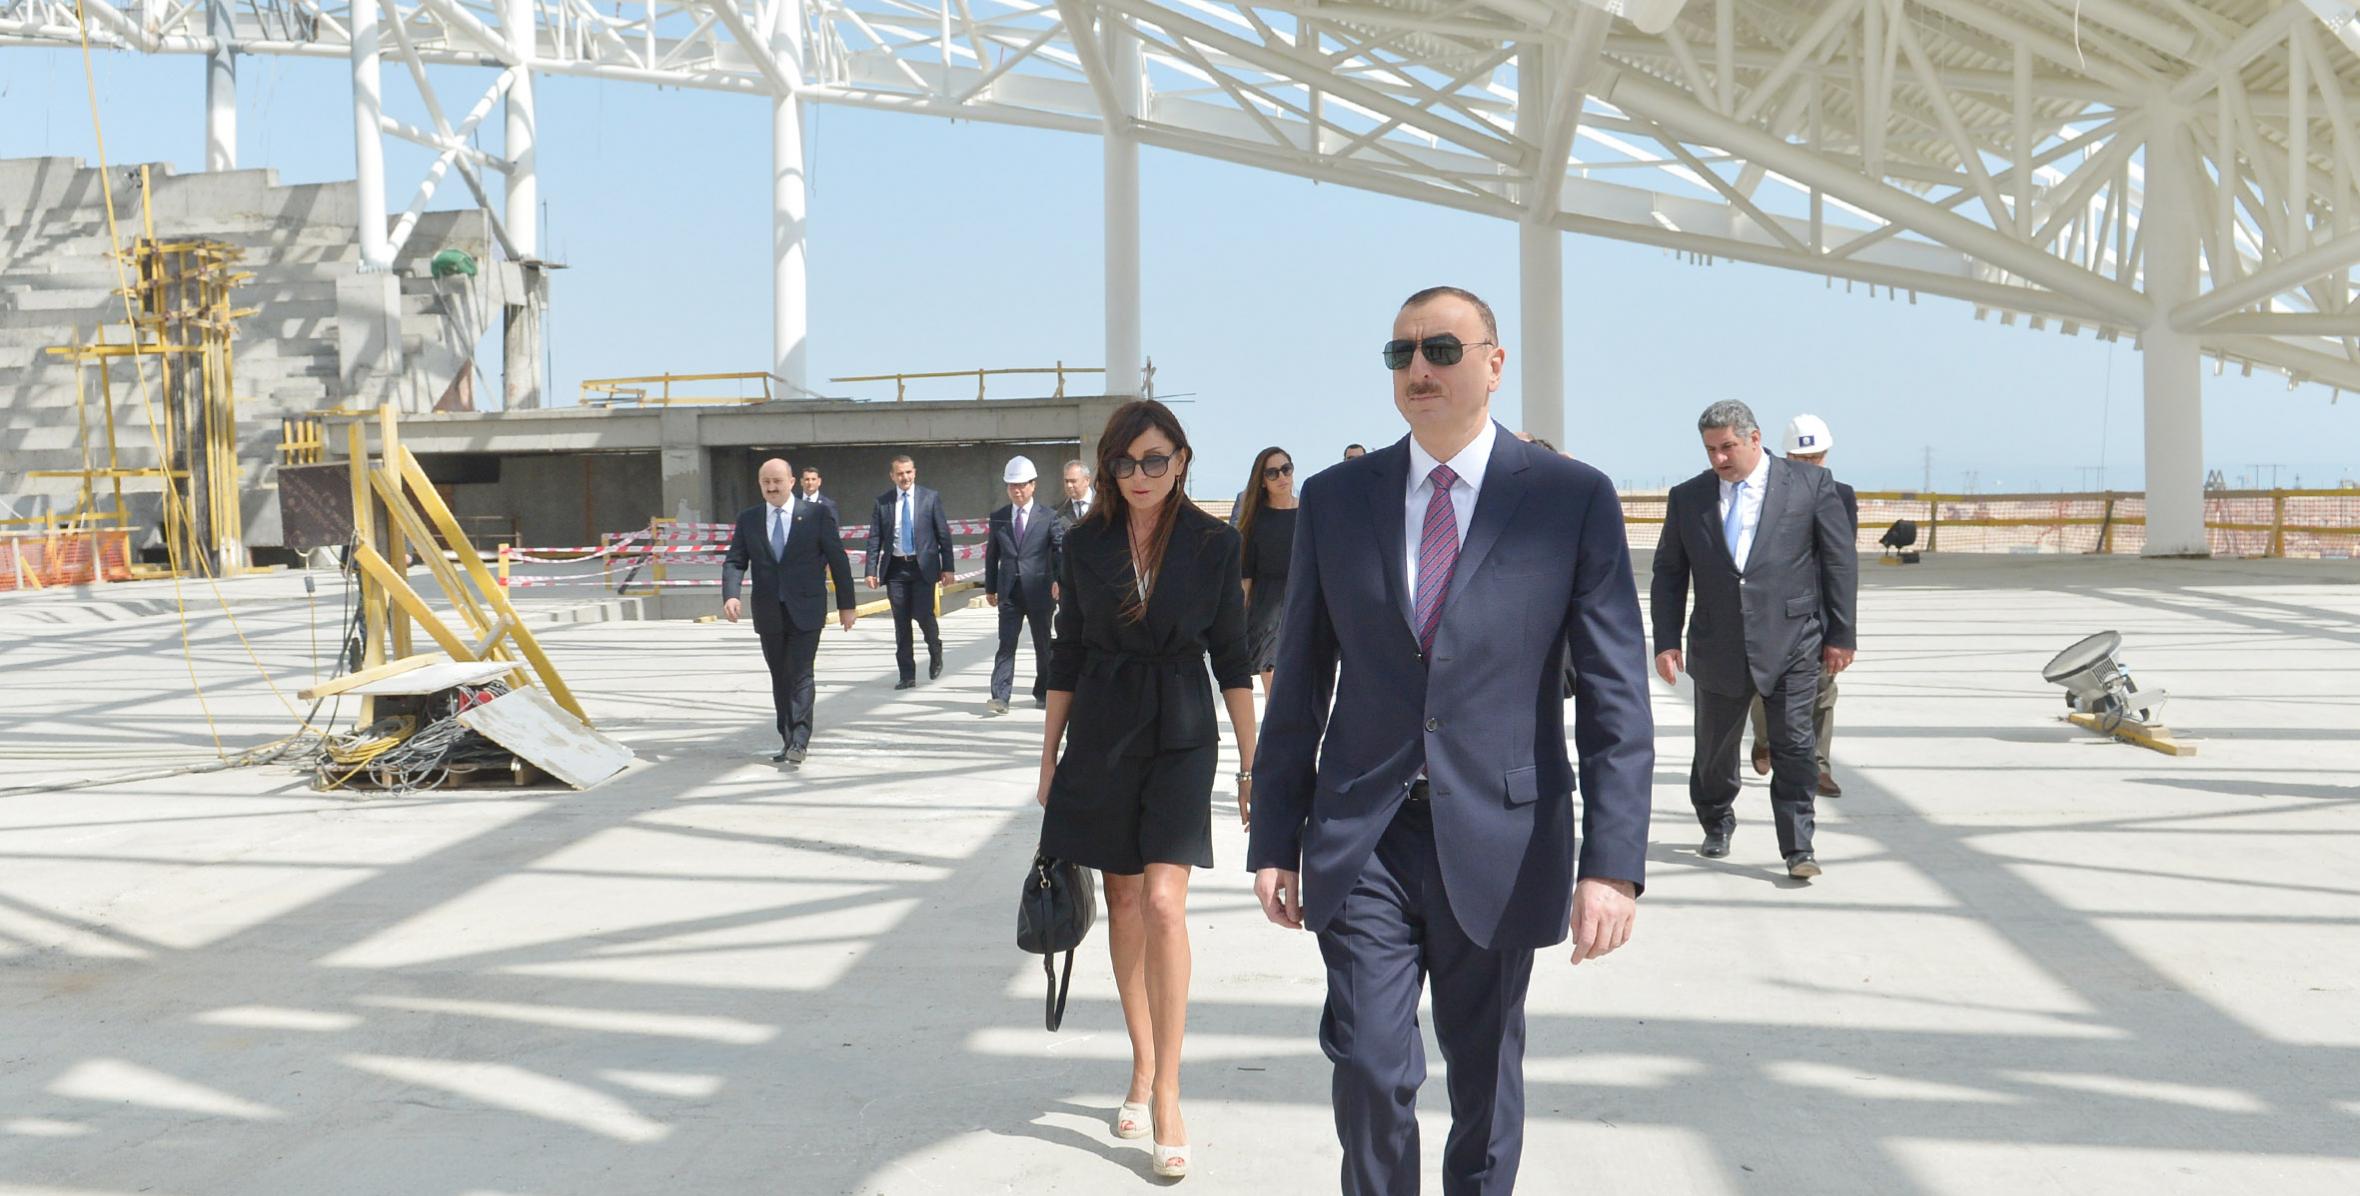 Ilham Aliyev reviewed the progress of construction of the Aquatic Palace in Baku